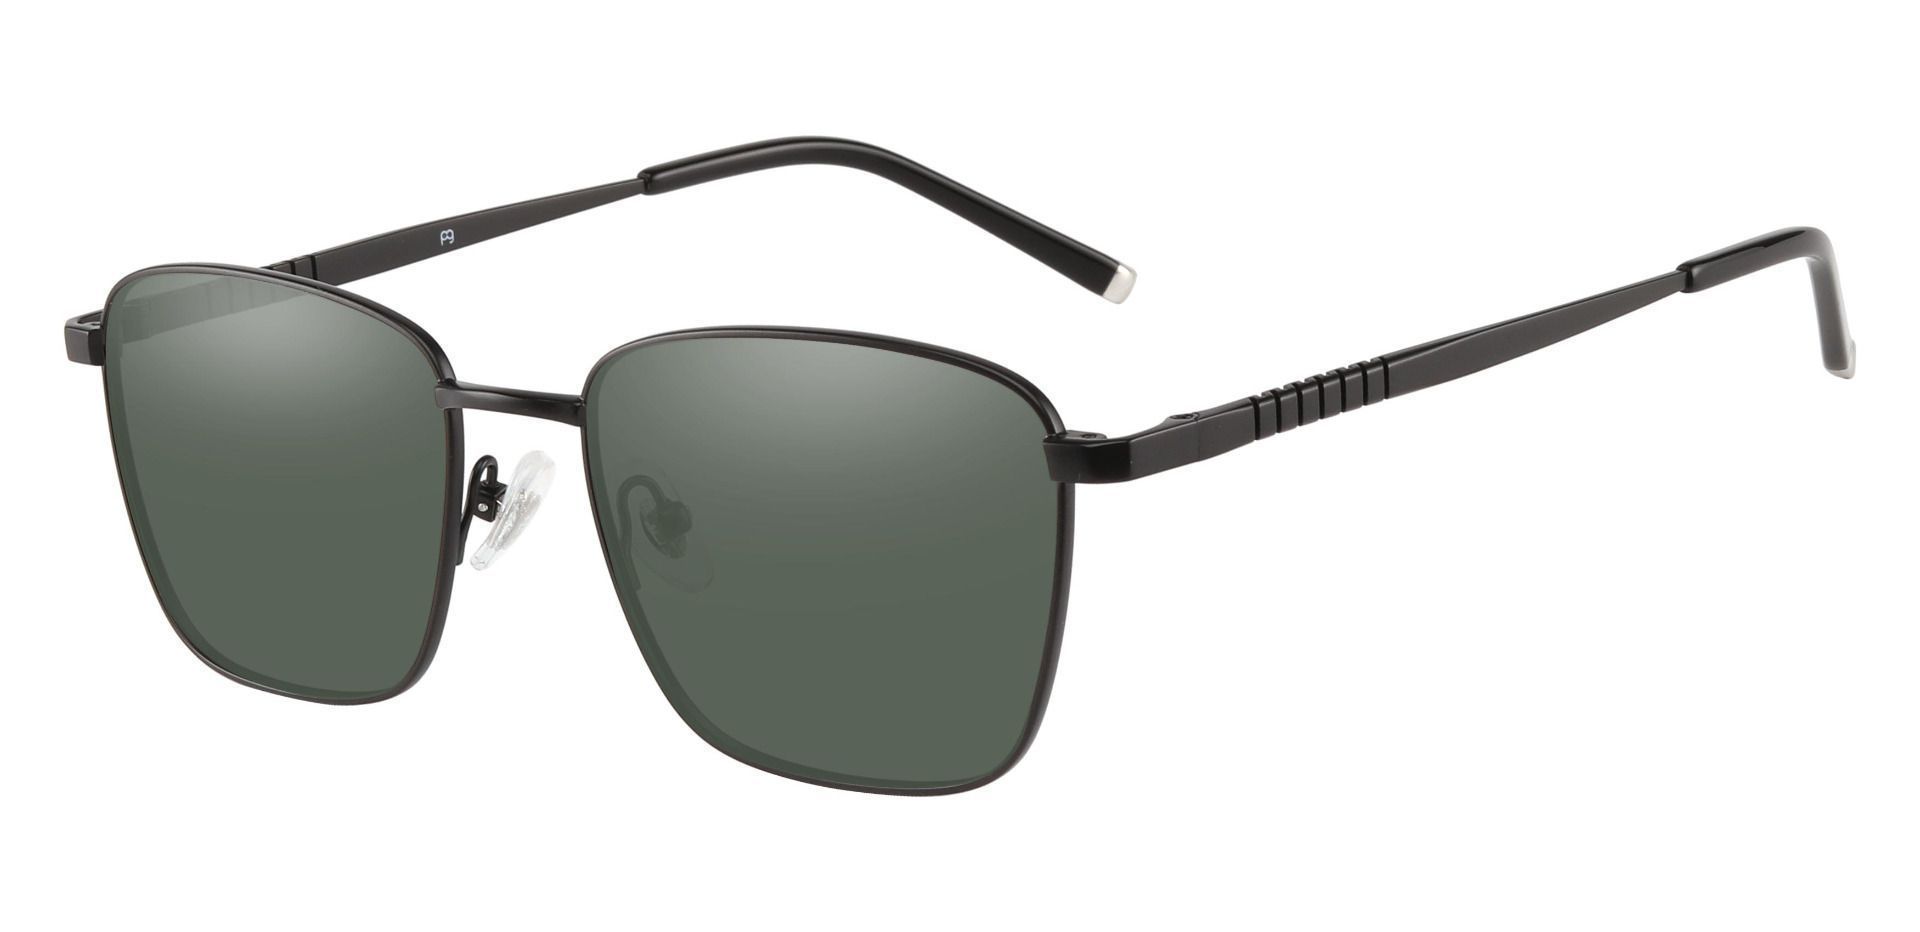 May Square Non-Rx Sunglasses - Black Frame With Green Lenses